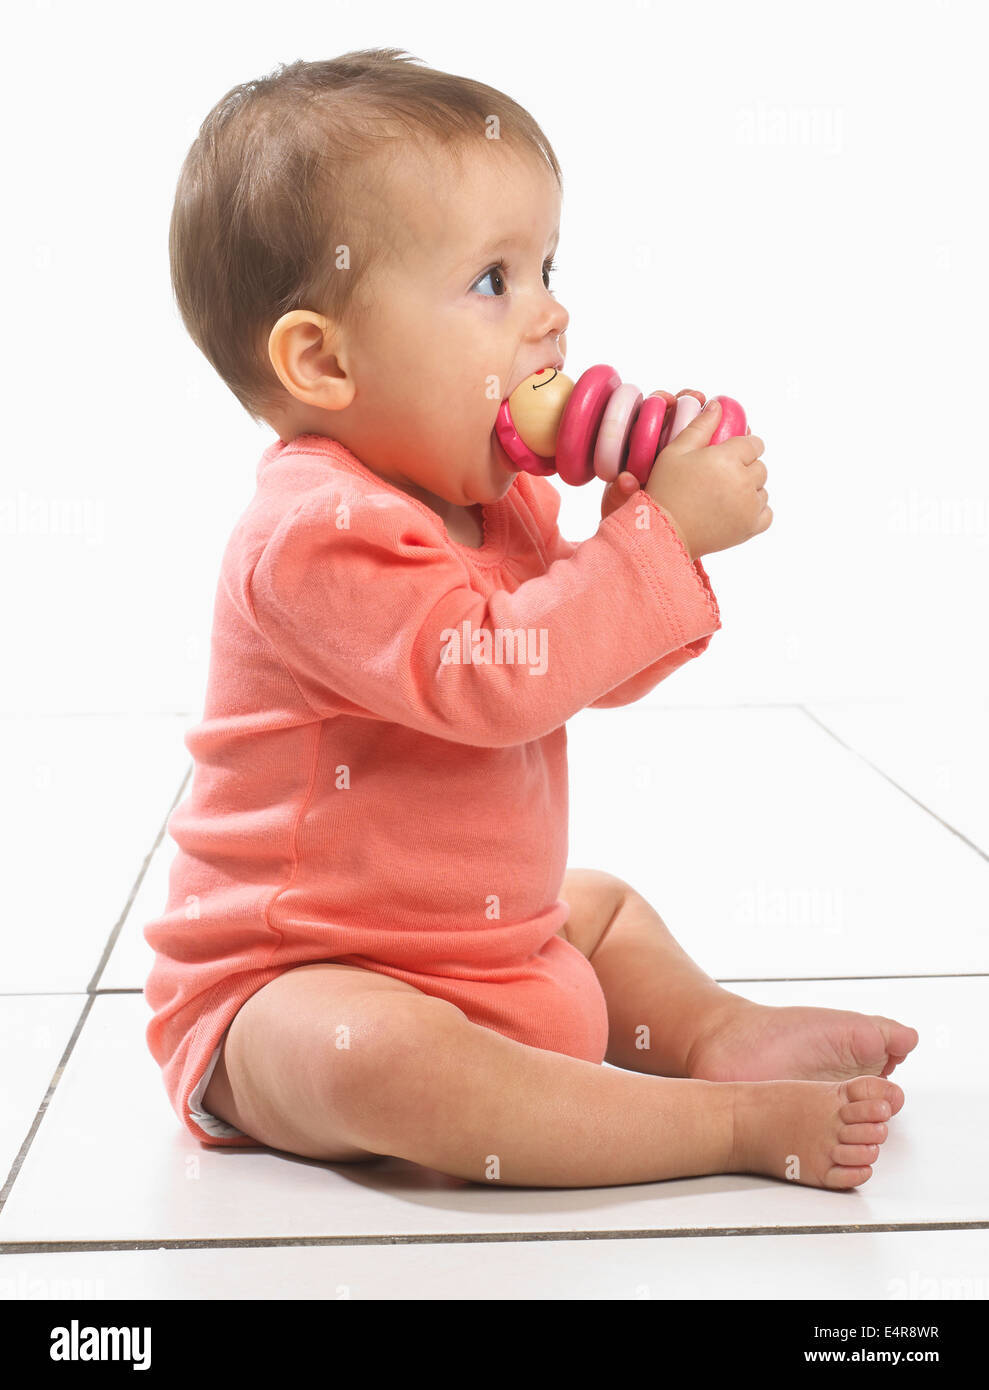 Baby girl (8 months) with toy in mouth Stock Photo